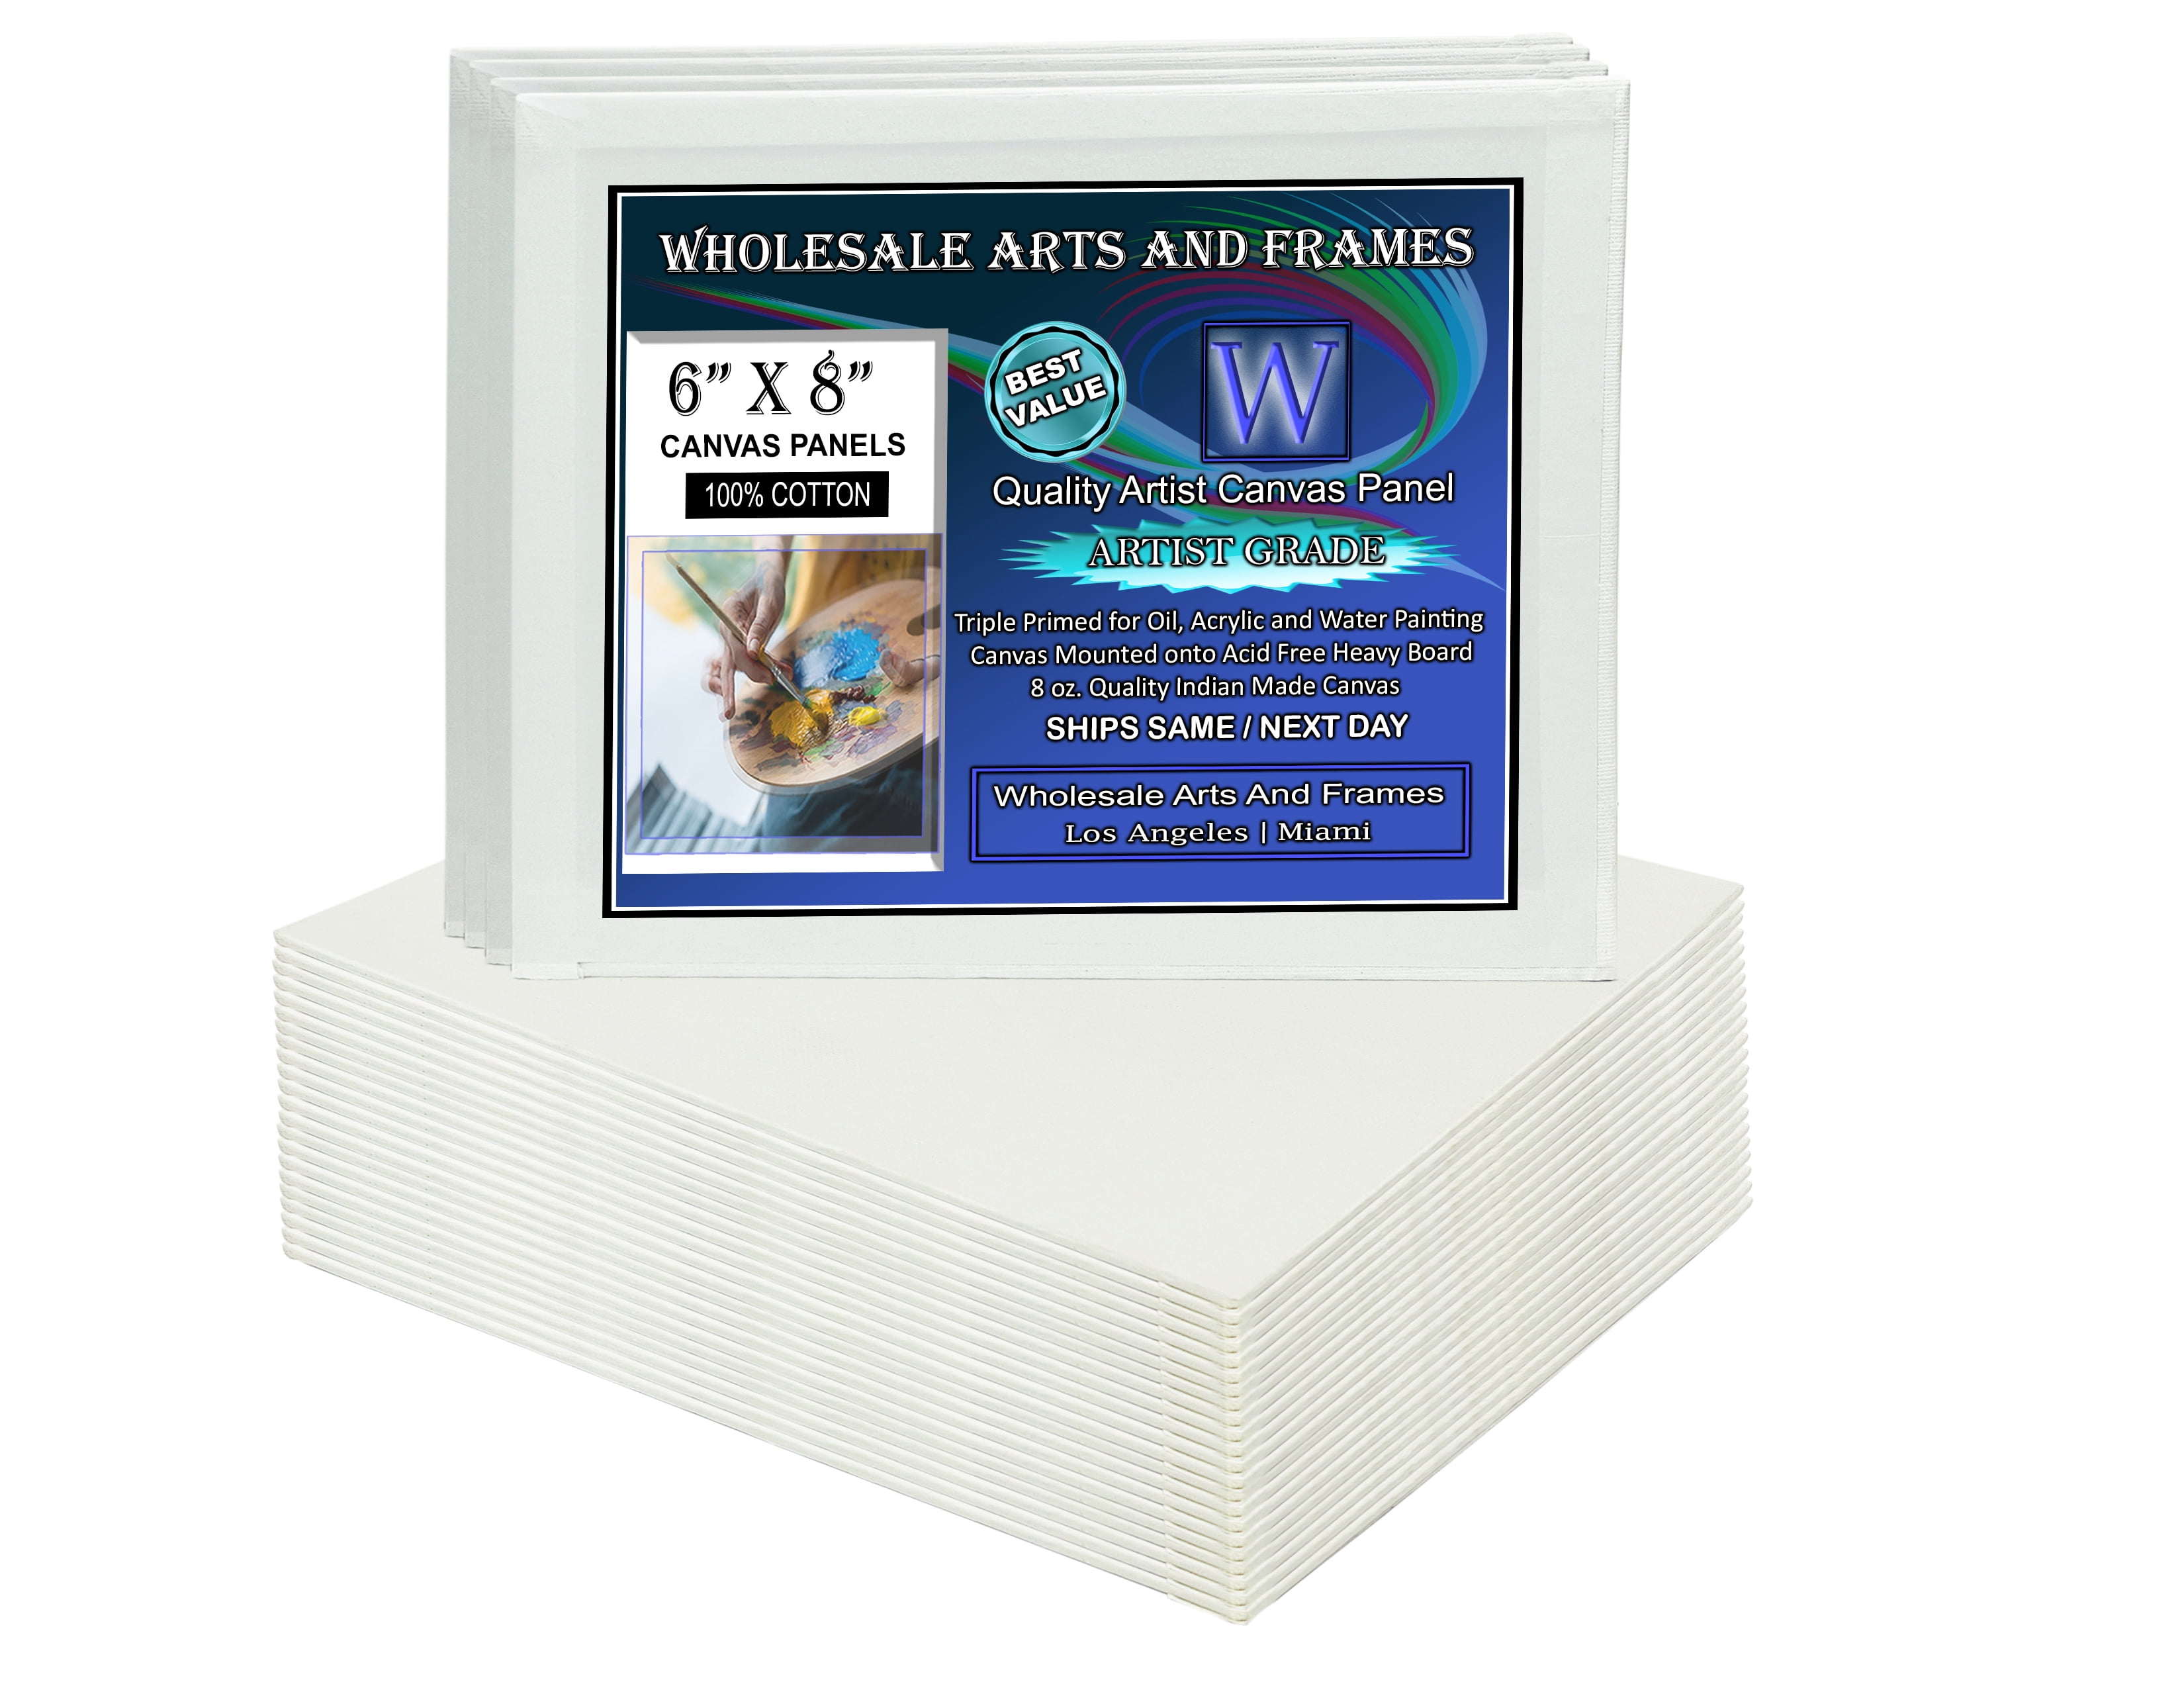 US Art Supply 5 x 7 inch Professional Artist Quality Acid Free Canvas Panels 96 Pack (1 Full Case of 96 Single Canvas Panels)